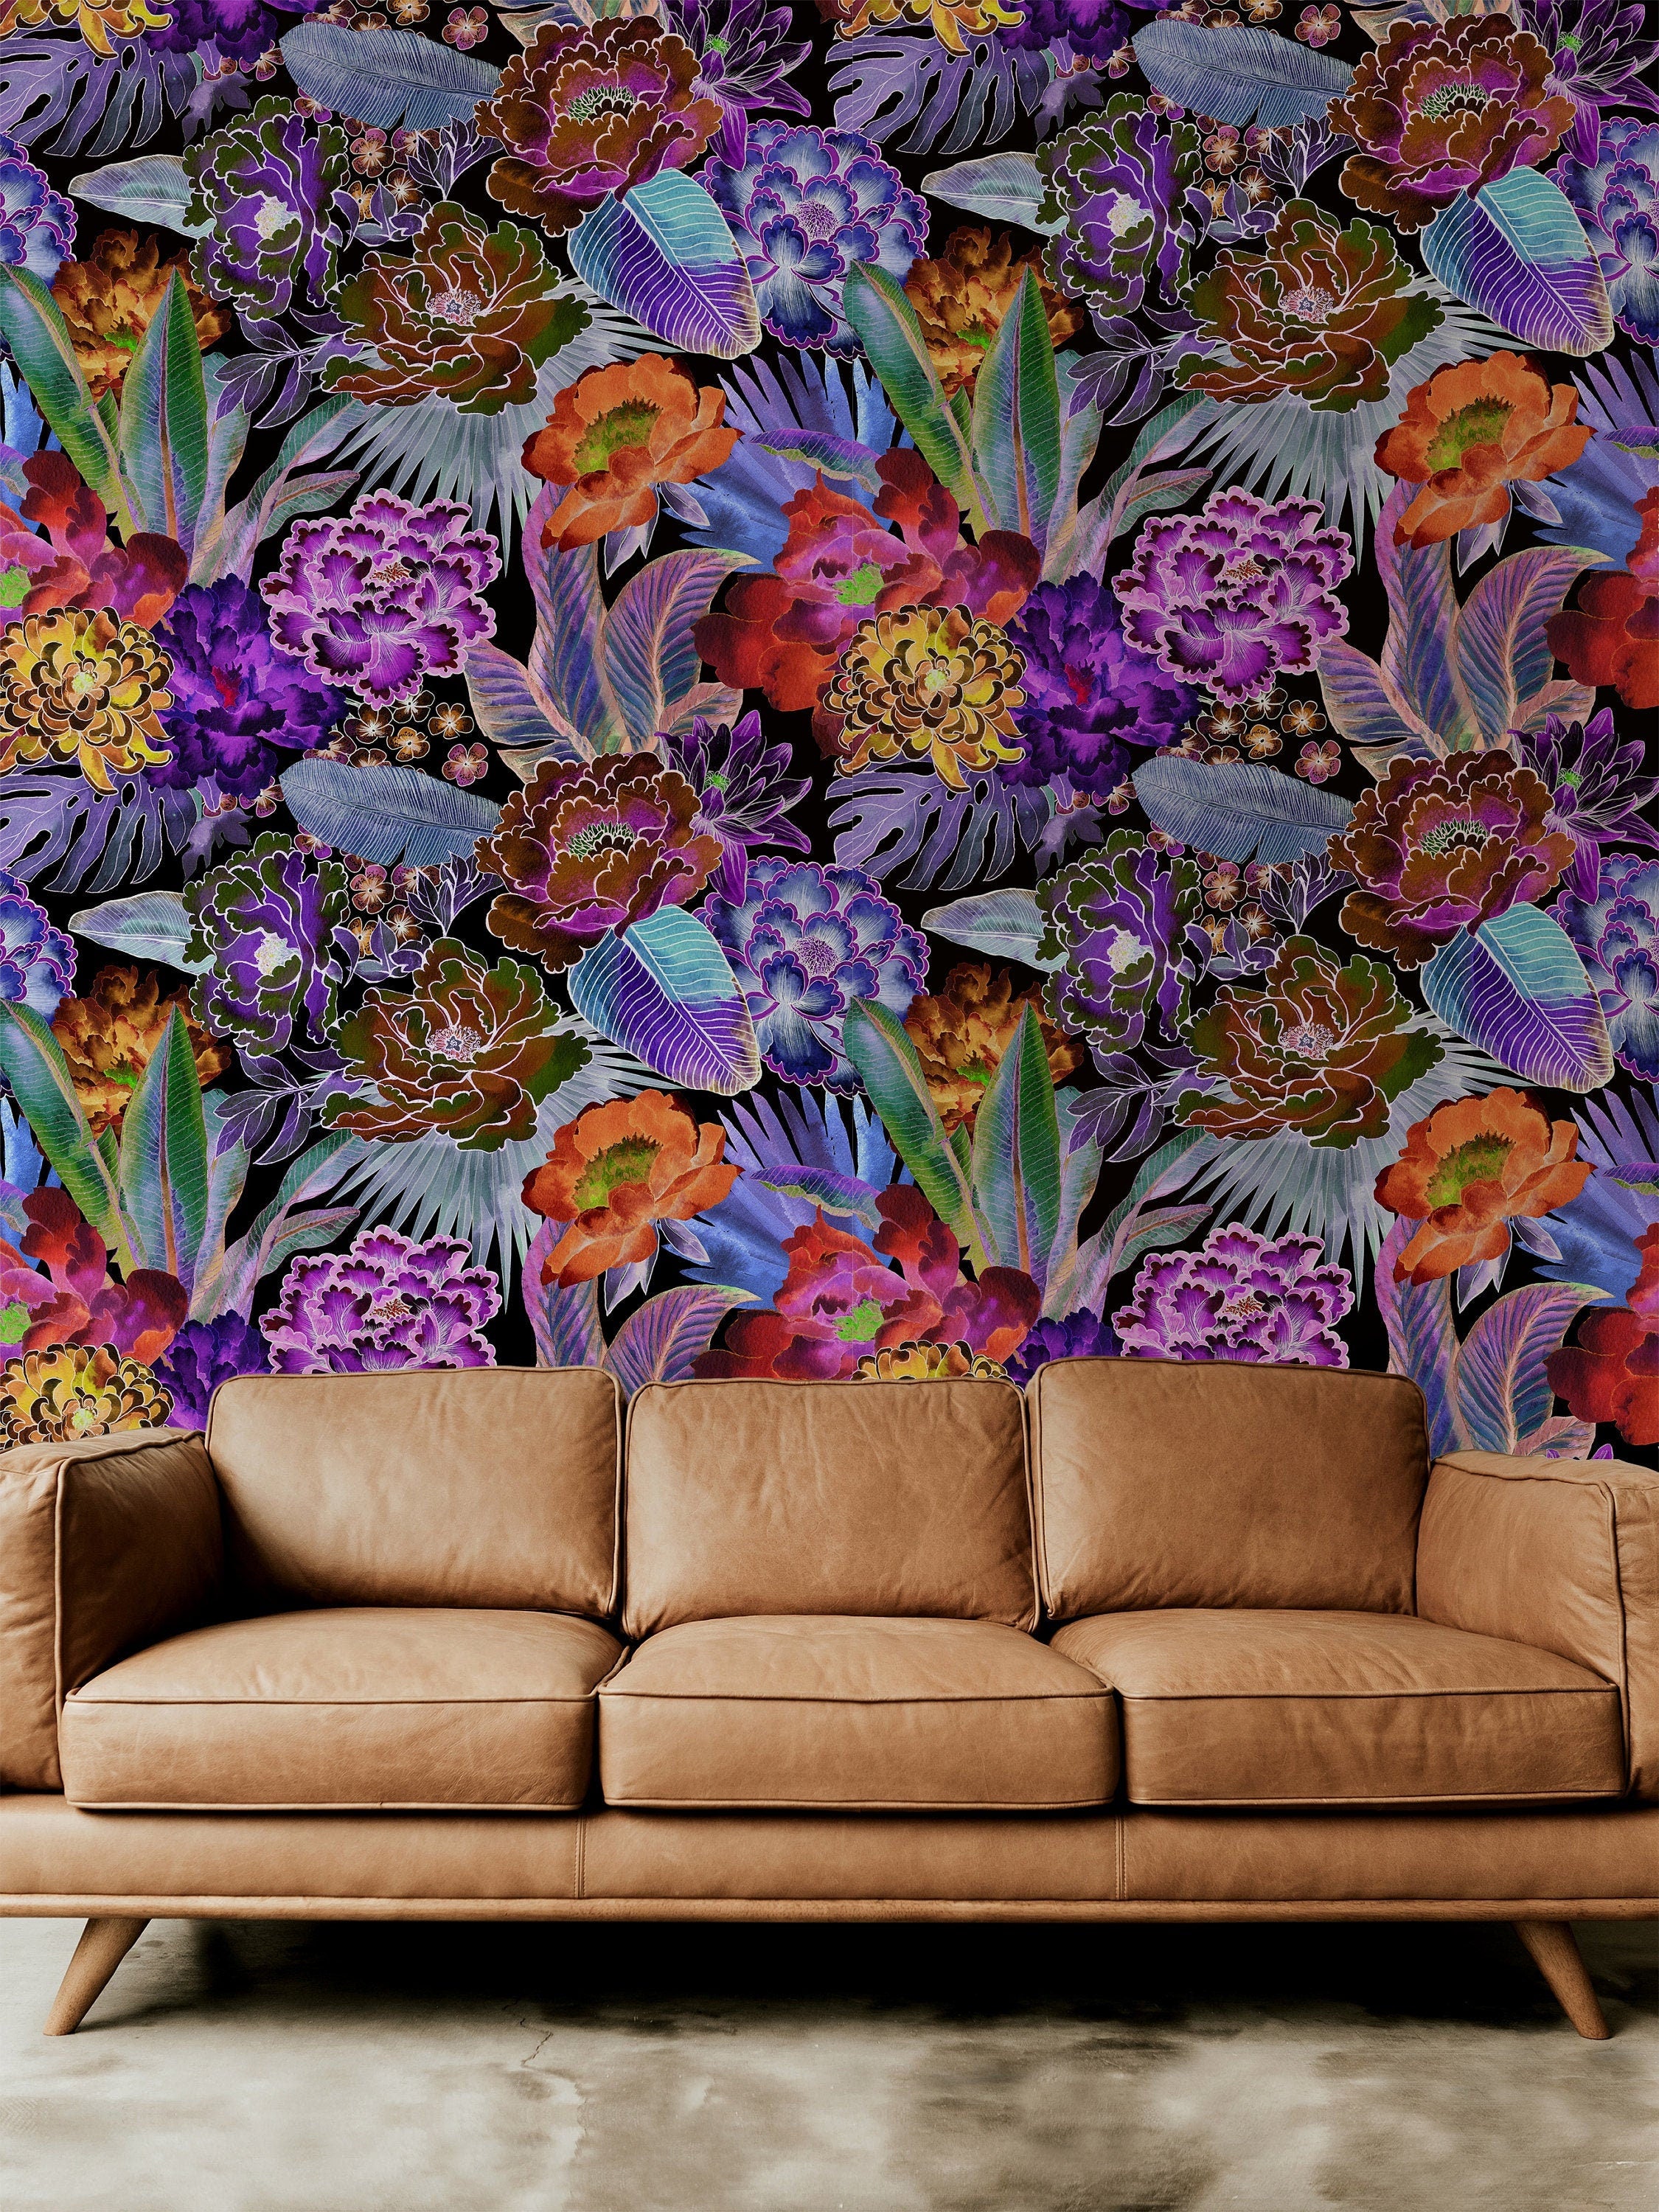 Dark Colorful Tropical Wallpaper | Removable Wallpaper | Peel And Stick Wallpaper | Wall Mural Wallpaper | Wall Paper Peel And Stick 2333 - JamesAndColors